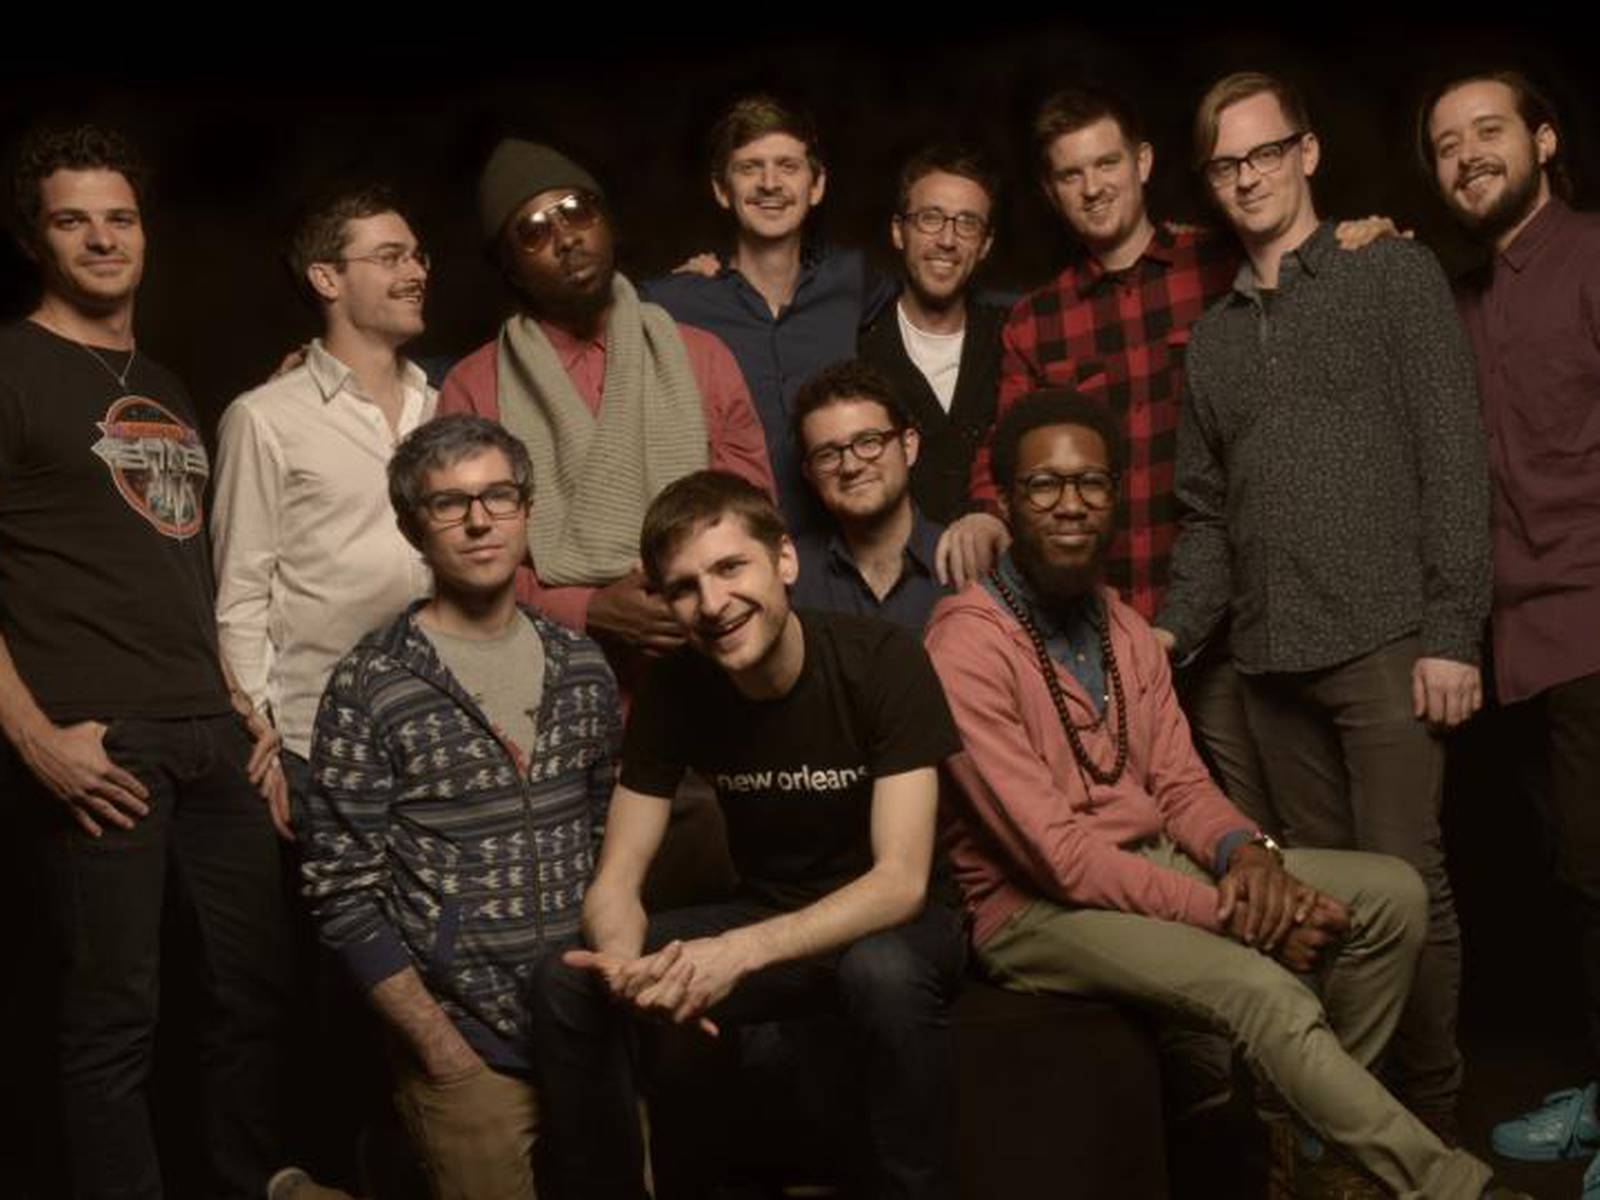 Snarky Puppy: the latest supergroup ripping up the genre rulebook